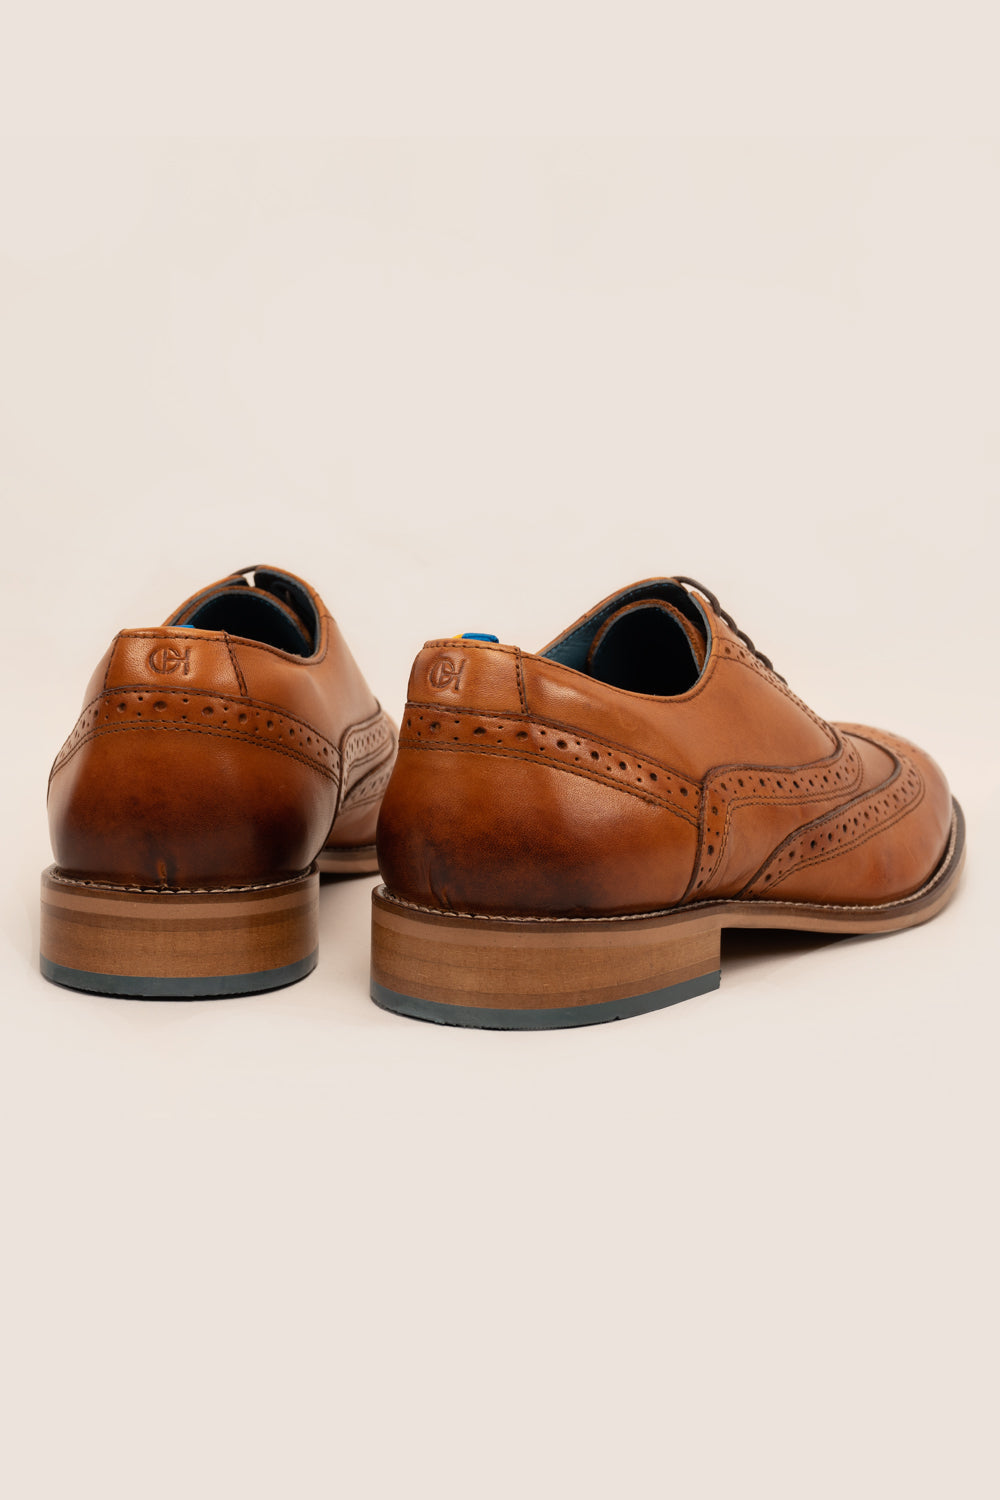 Winston tan brogue wingtip oxford shoes for men by oswin hyde